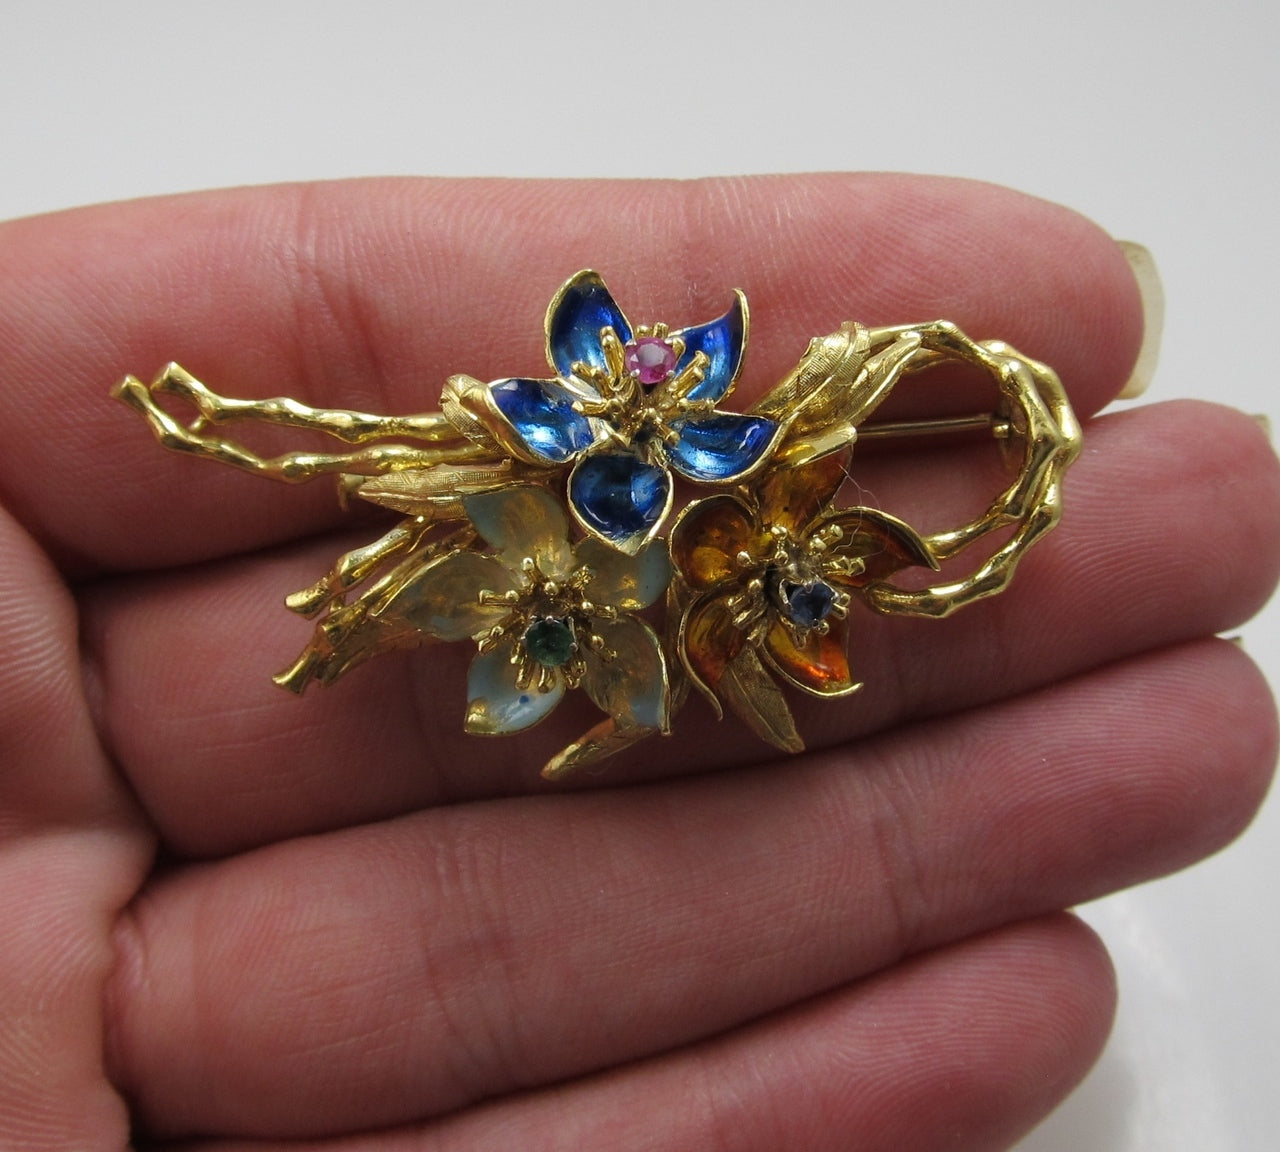 Vintage 18k Gold Enamel Flower Pin With A Ruby, Sapphire And Emerald.